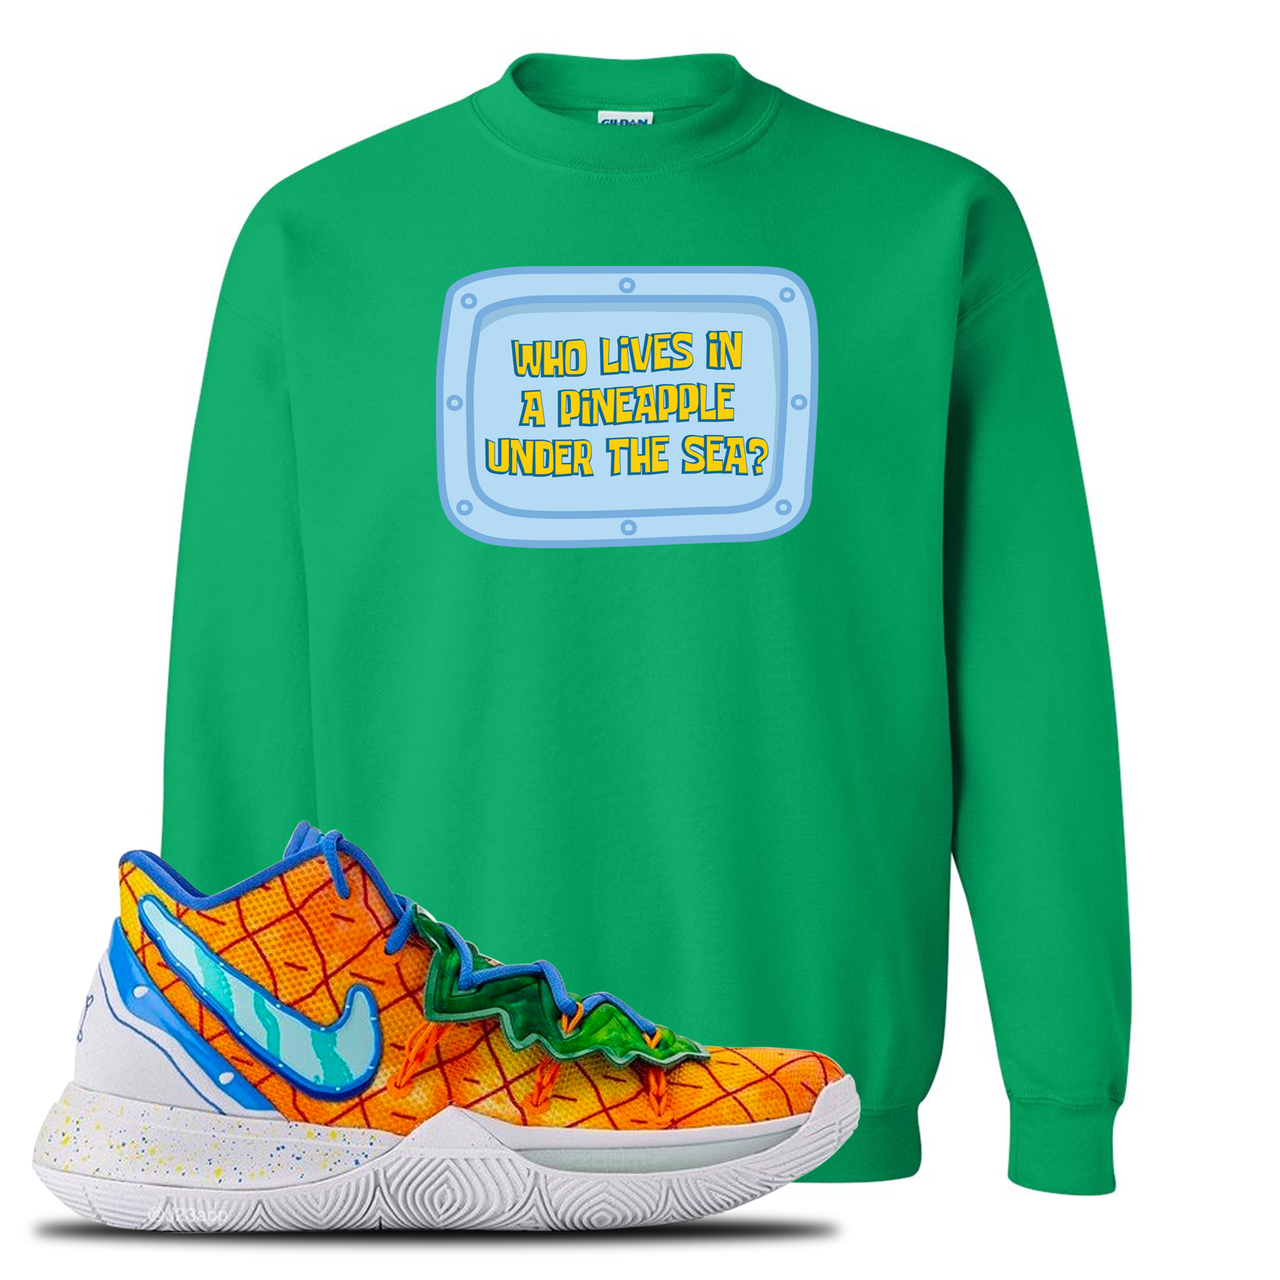 Kyrie 5 Pineapple House Who Lives in a Pineapple Under the Sea? Irish Green Sneaker Hook Up Crewneck Sweatshirt